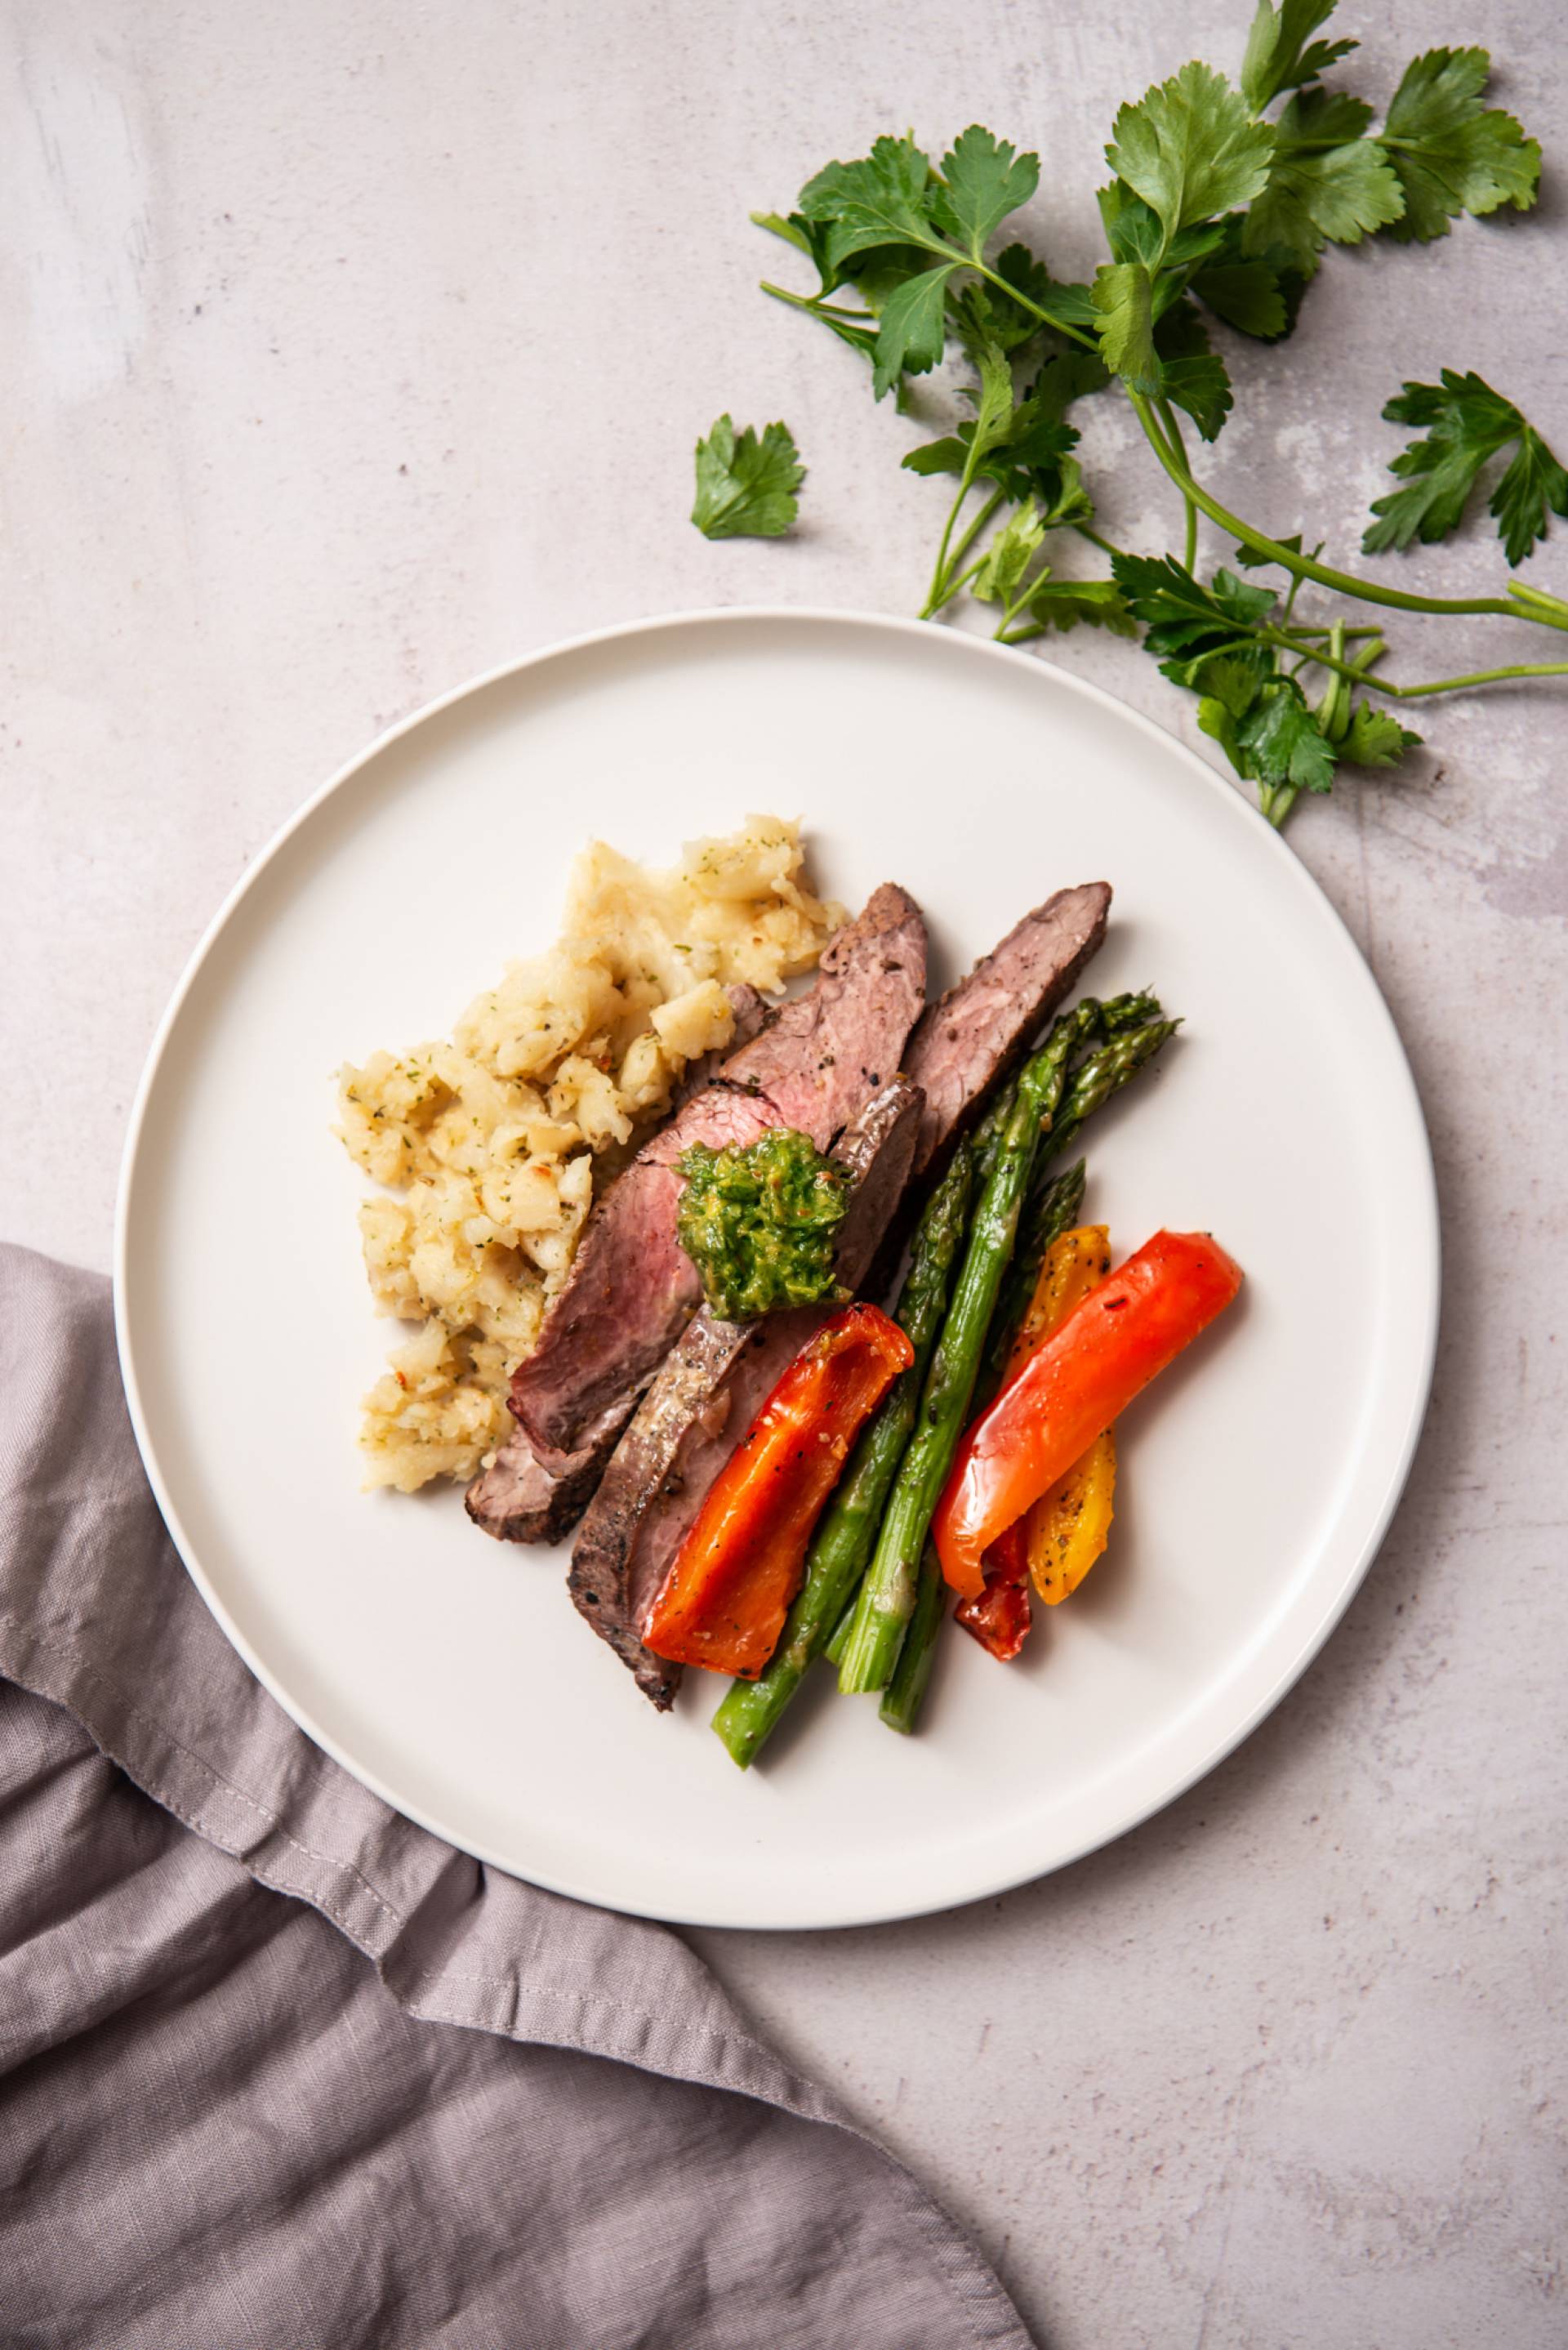 LOW CARB FIT 15: Grilled Flank Steak with Chimichurri